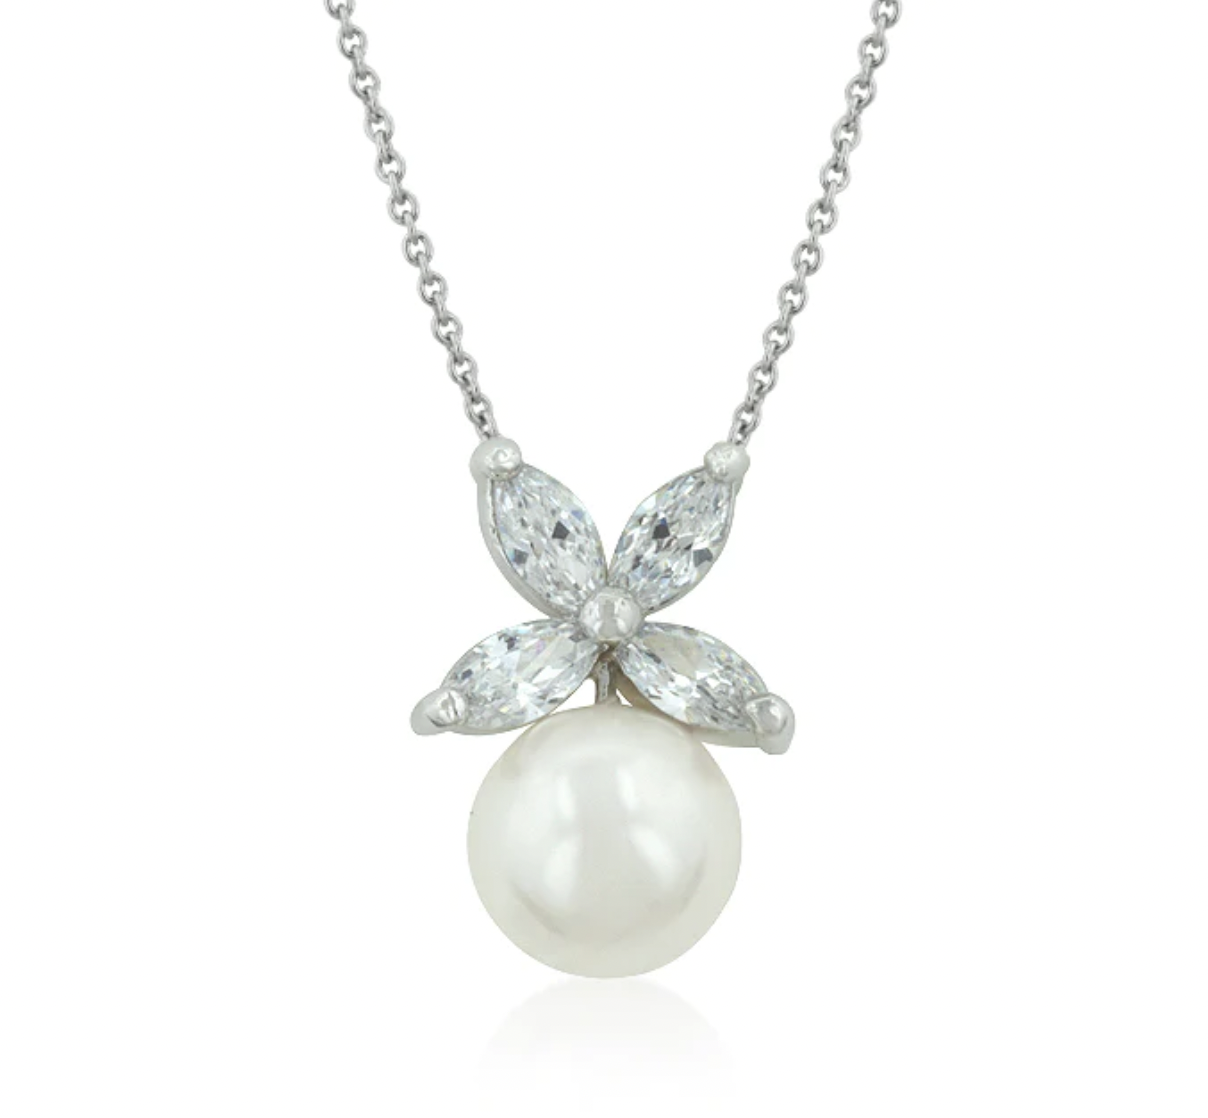 Pippa Middleton Butterfly Pear Pendant